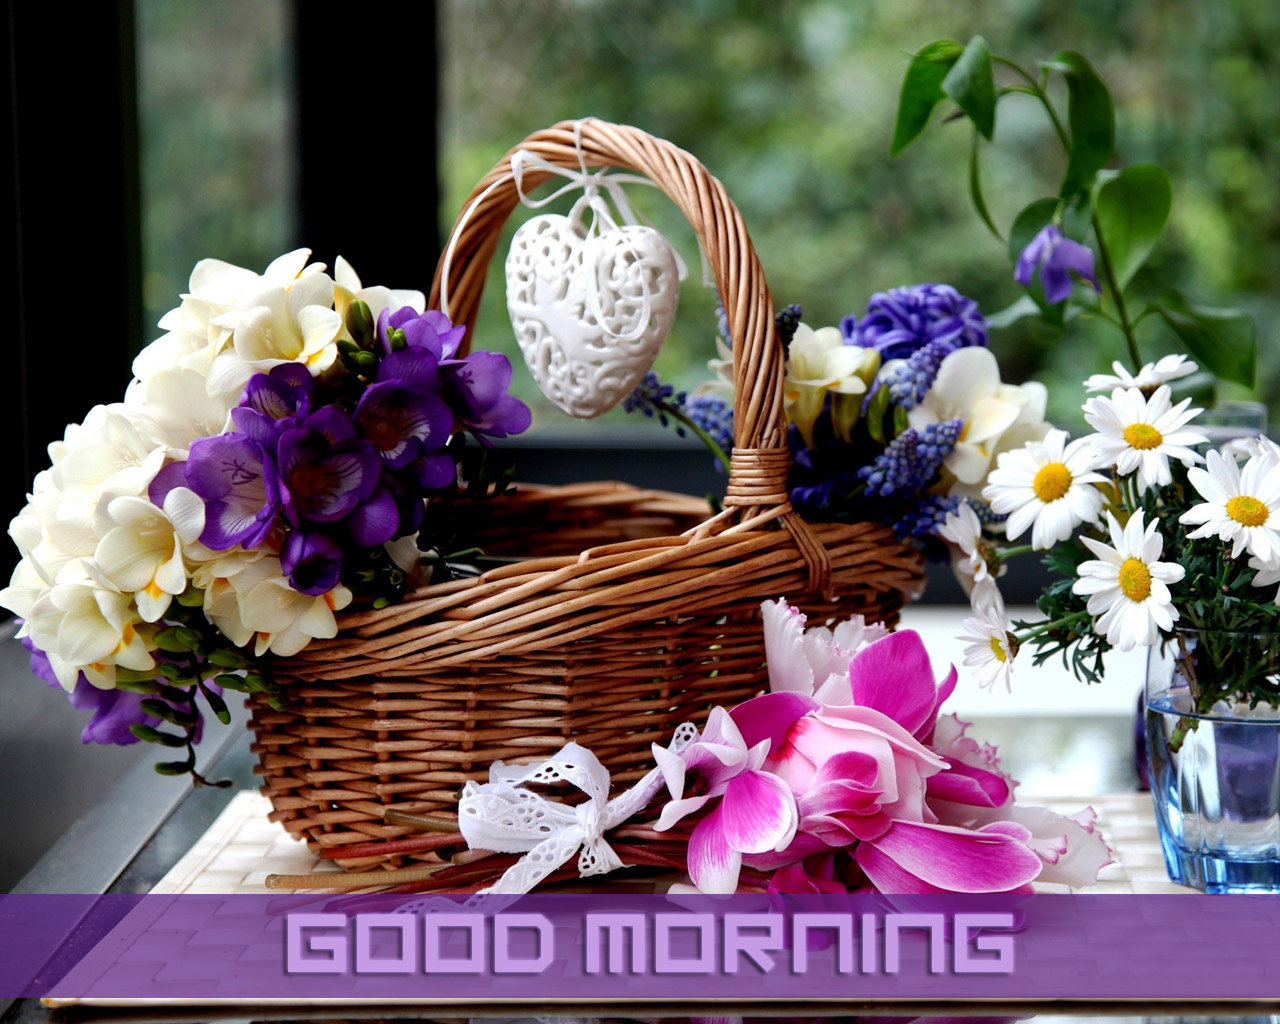 The HD Good Morning Wallpaper Image Picture And Best